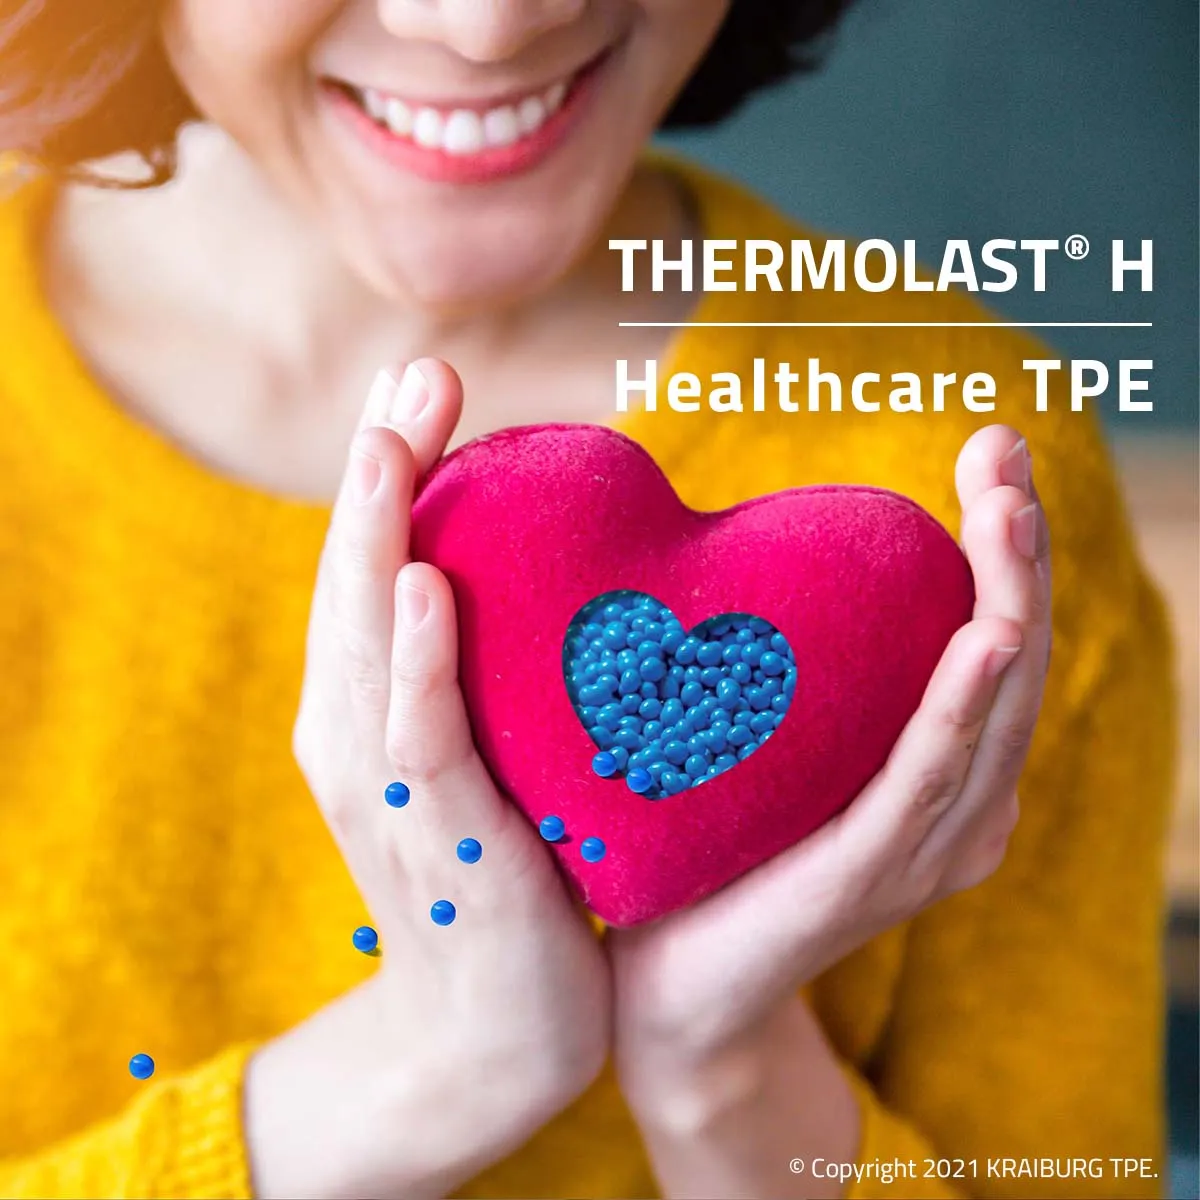 THERMOLAST® H EXCLUSIVELY FOR ASIA PACIFIC'S HEALTHCARE AND MEDICAL DEVICE MARKET